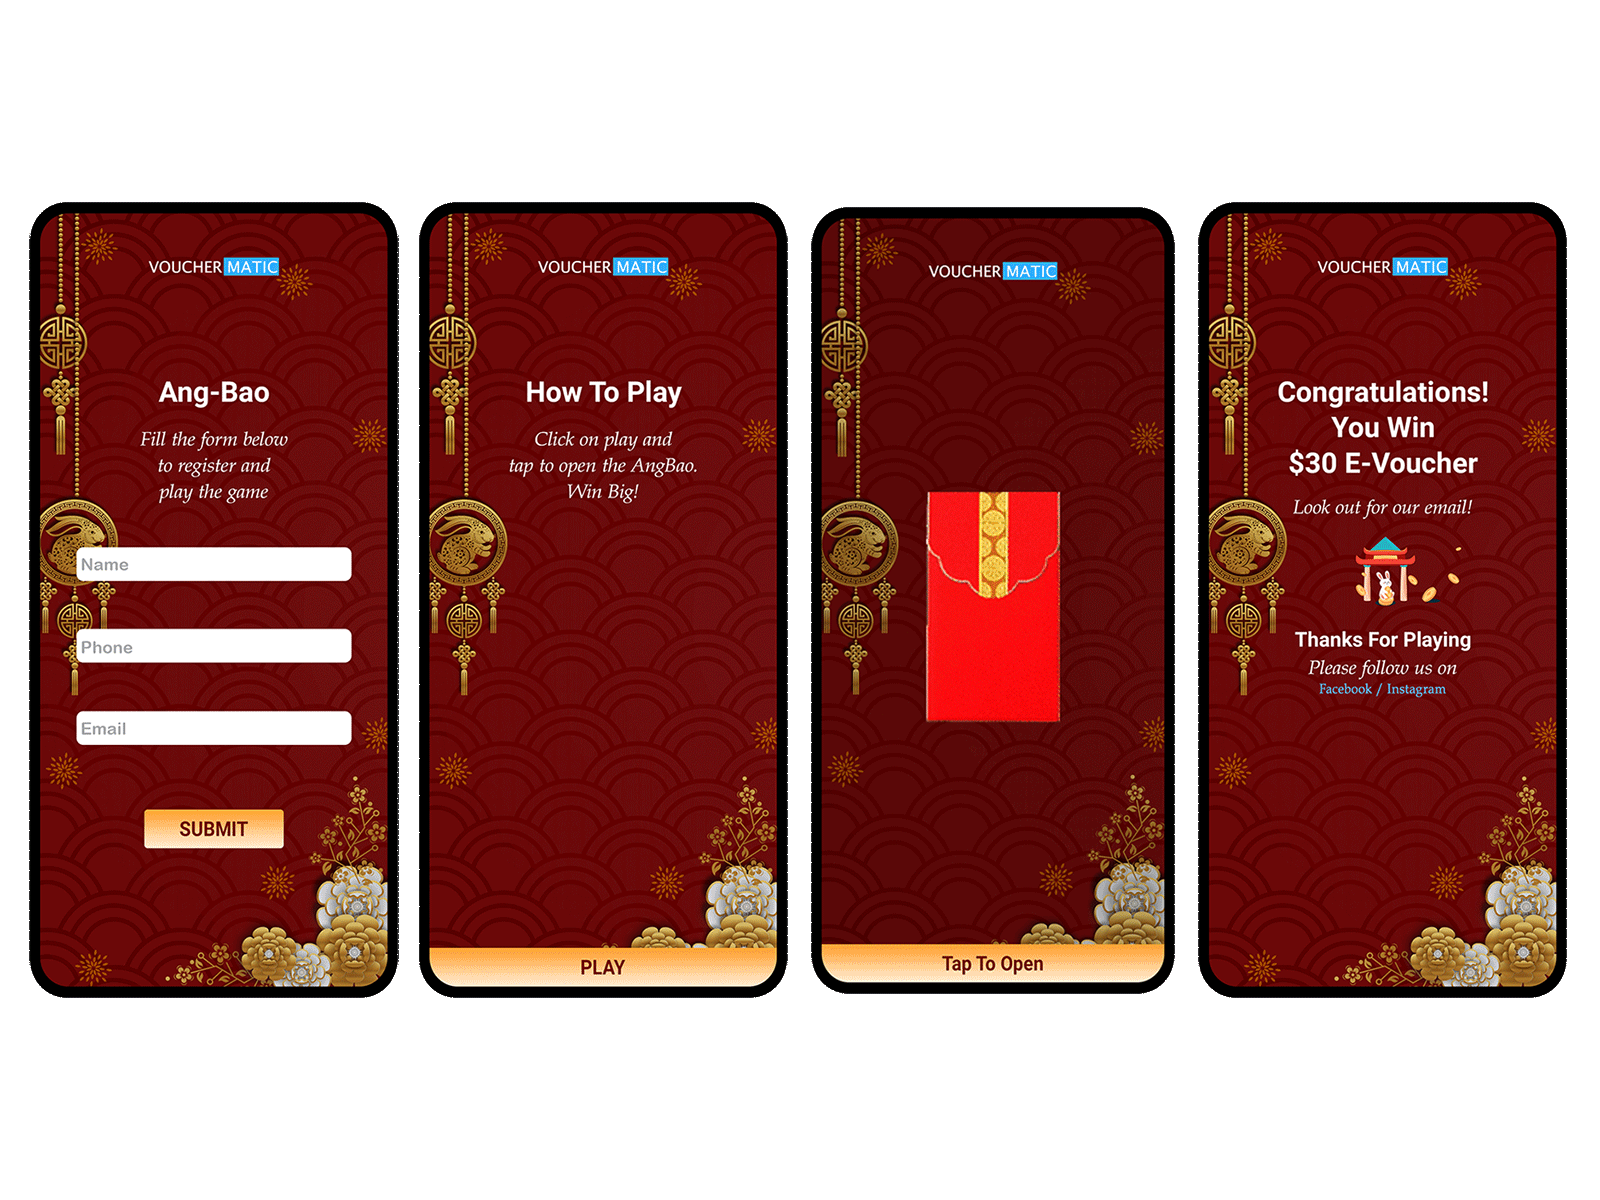 AngBao angbao branding business promotion chinese new year cny customer engagement digital voucher envelop opening game evoucher gamification loyalty program mobile voucher online marketing reward management voucher vouchermatic